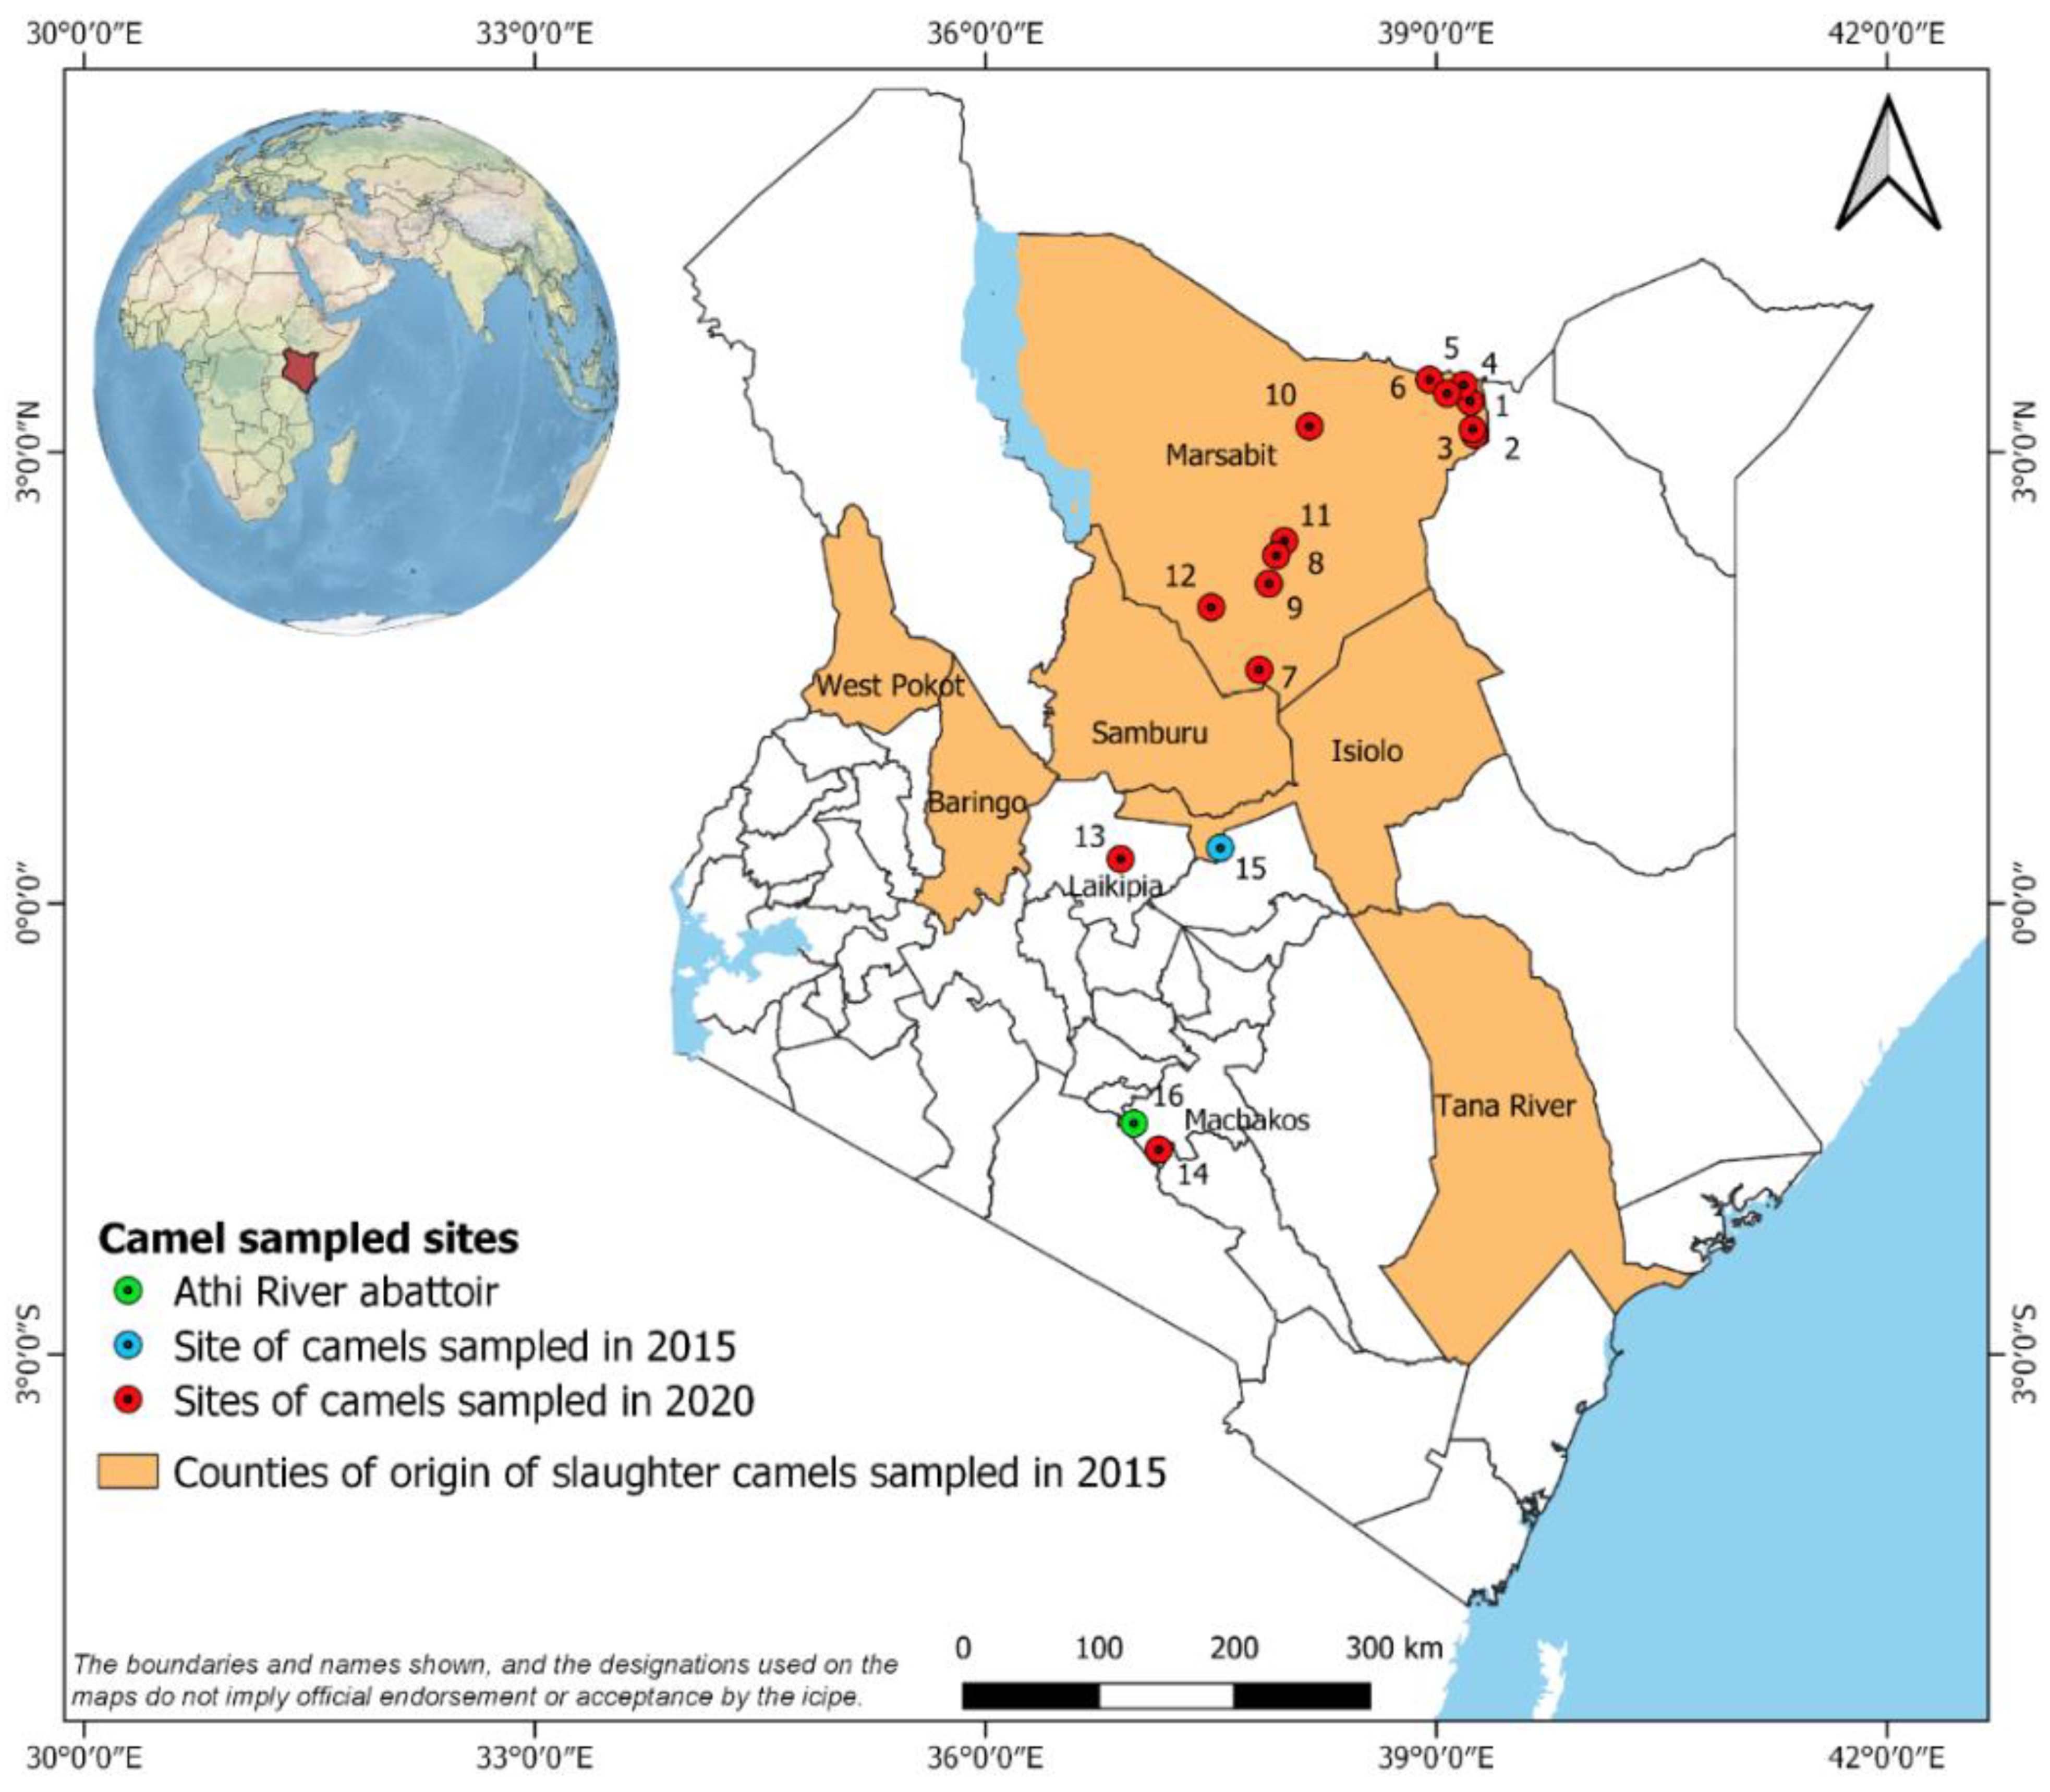 Microorganisms | Free Full-Text | Detection of Antibodies to Ehrlichia spp.  in Dromedary Camels and Co-Grazing Sheep in Northern Kenya Using an  Ehrlichia ruminantium Polyclonal Competitive ELISA